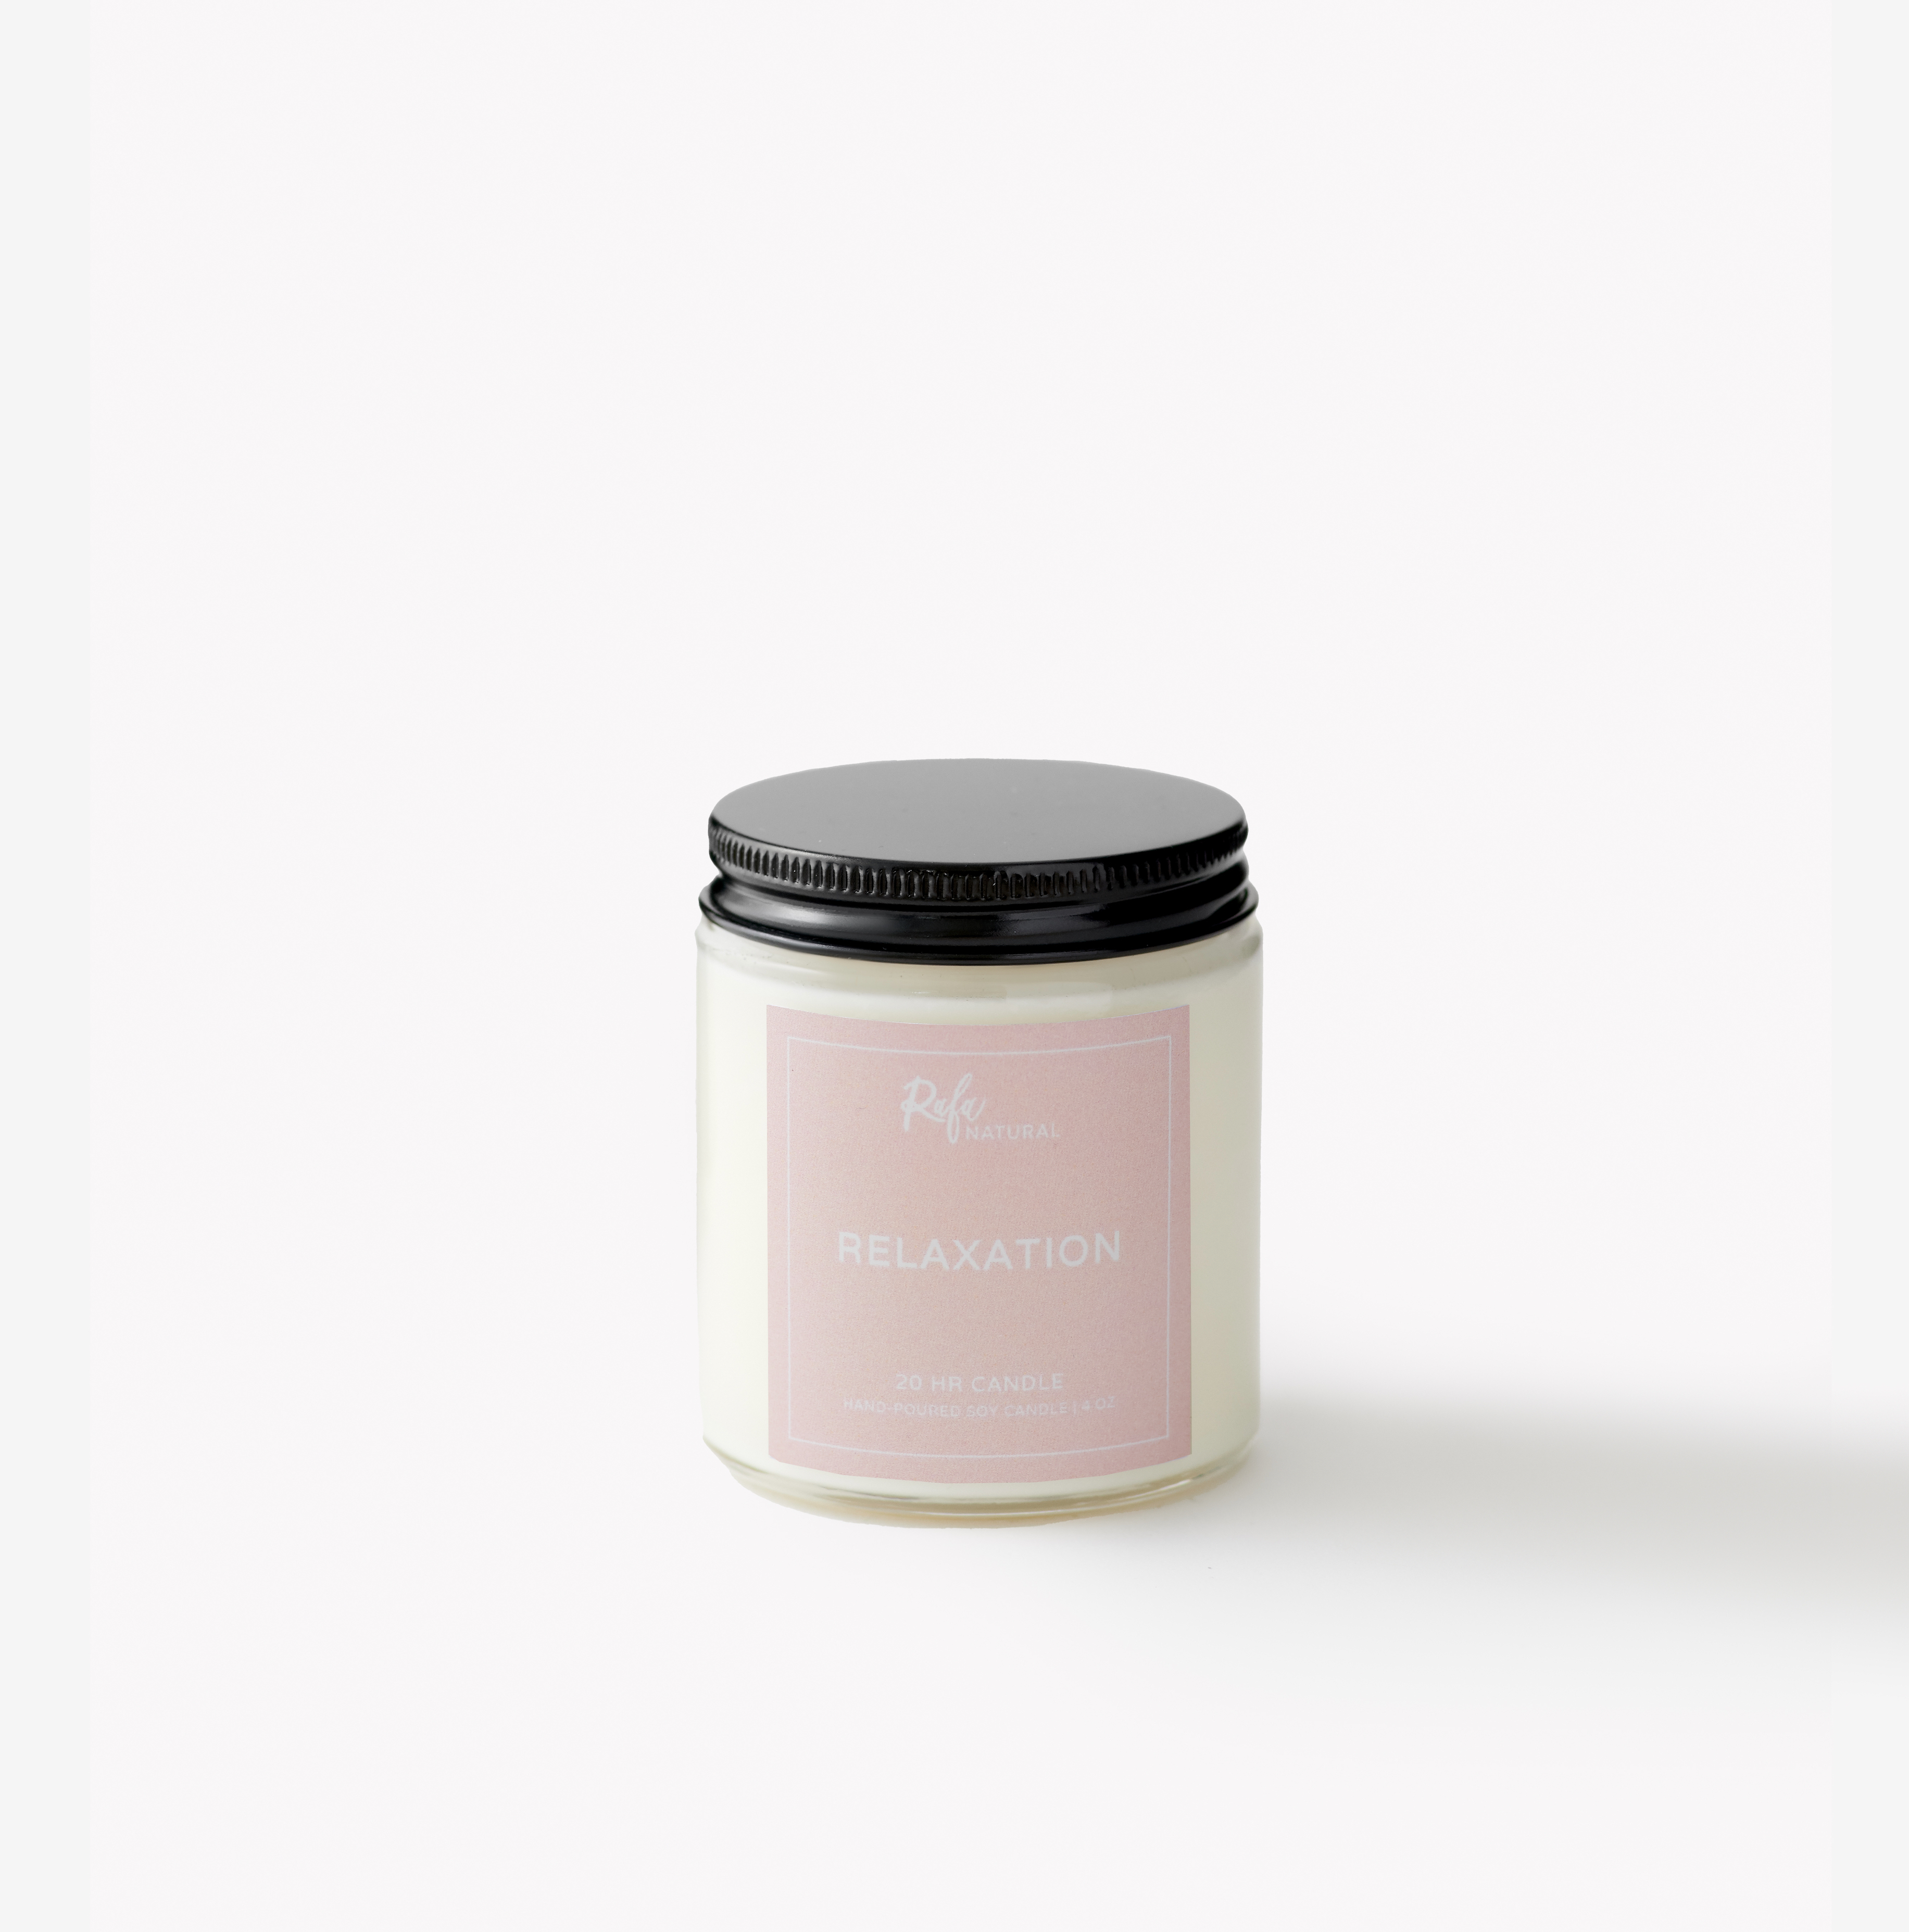 20Hr Relaxation Soy Candle